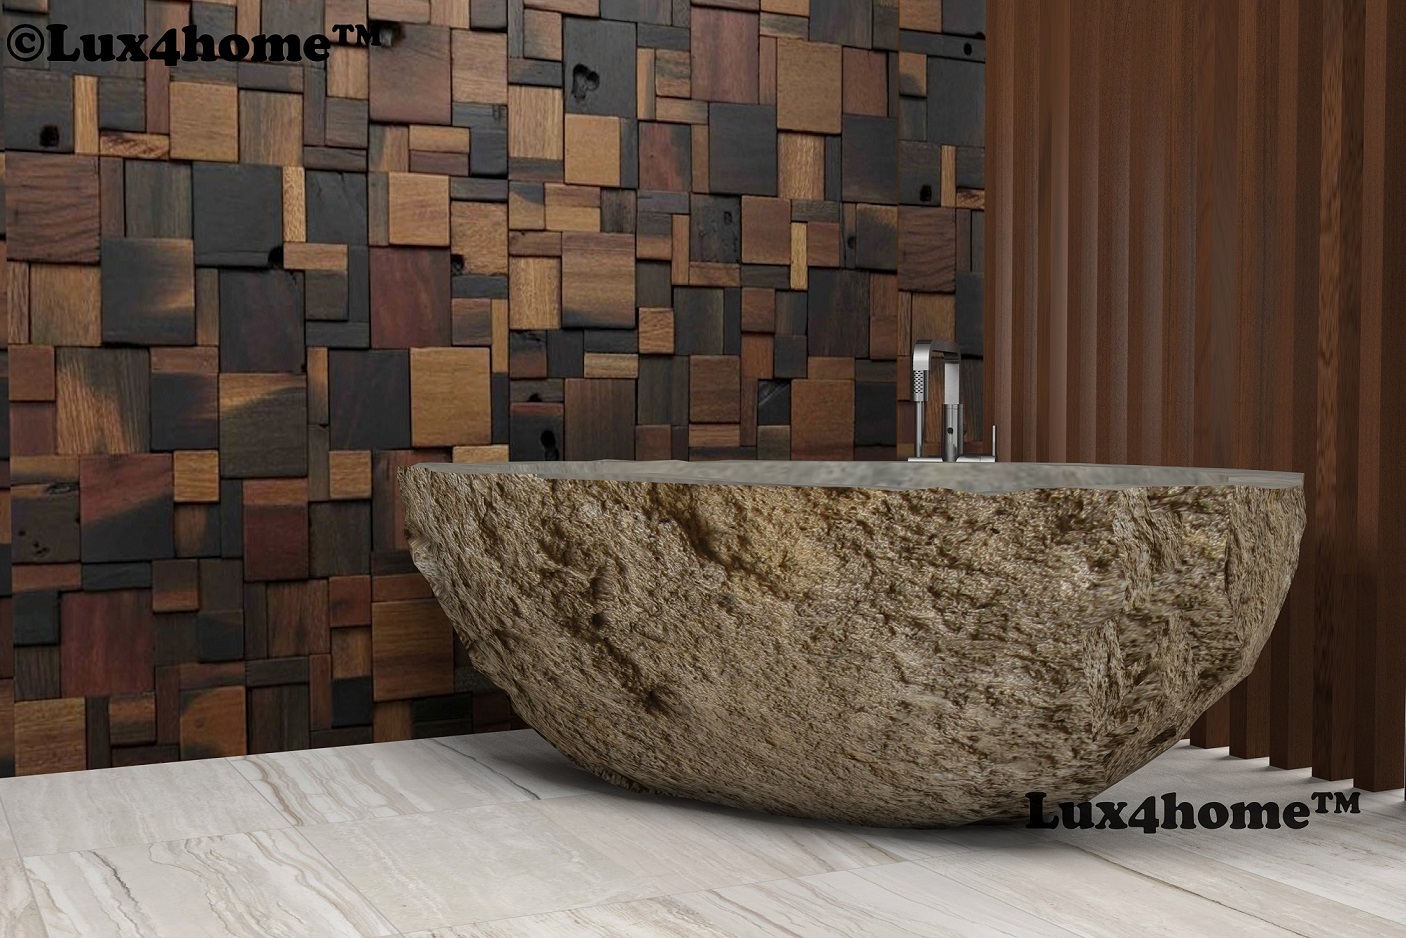 The best River stone bathtubs producer. Lux4home™